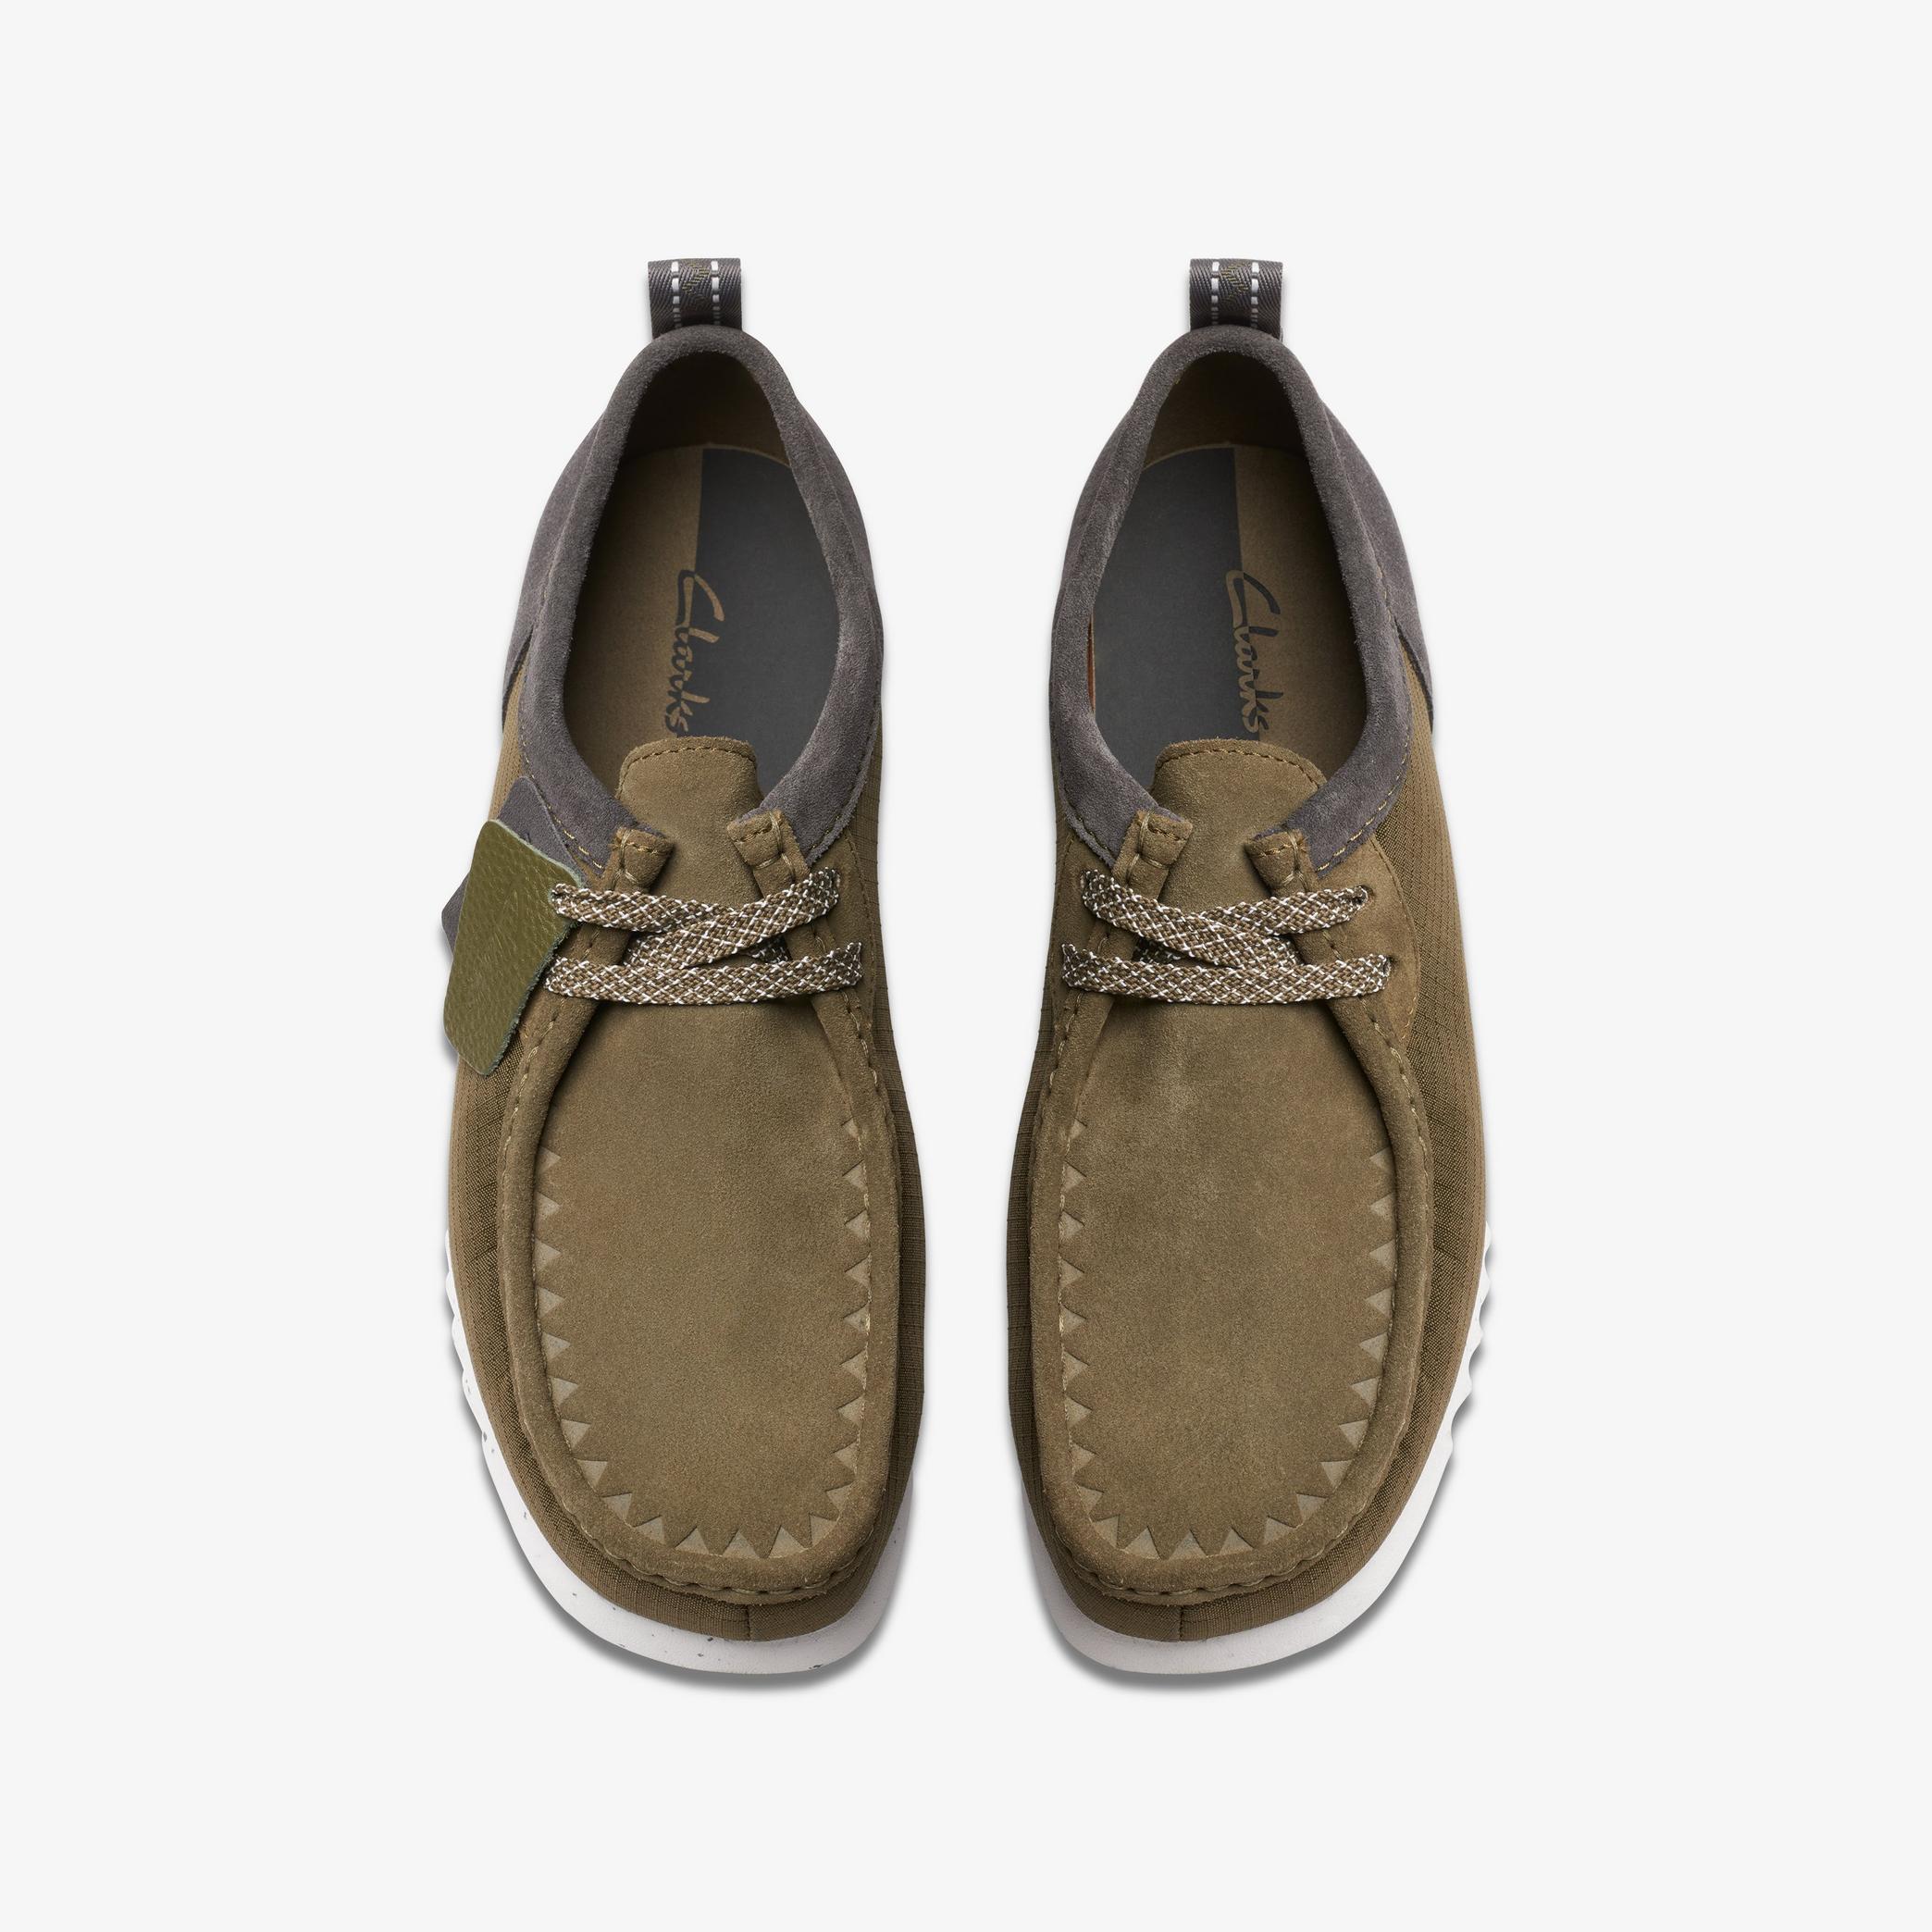 Wallabee FTRE Lo Olive Combination Moccasins, view 6 of 6